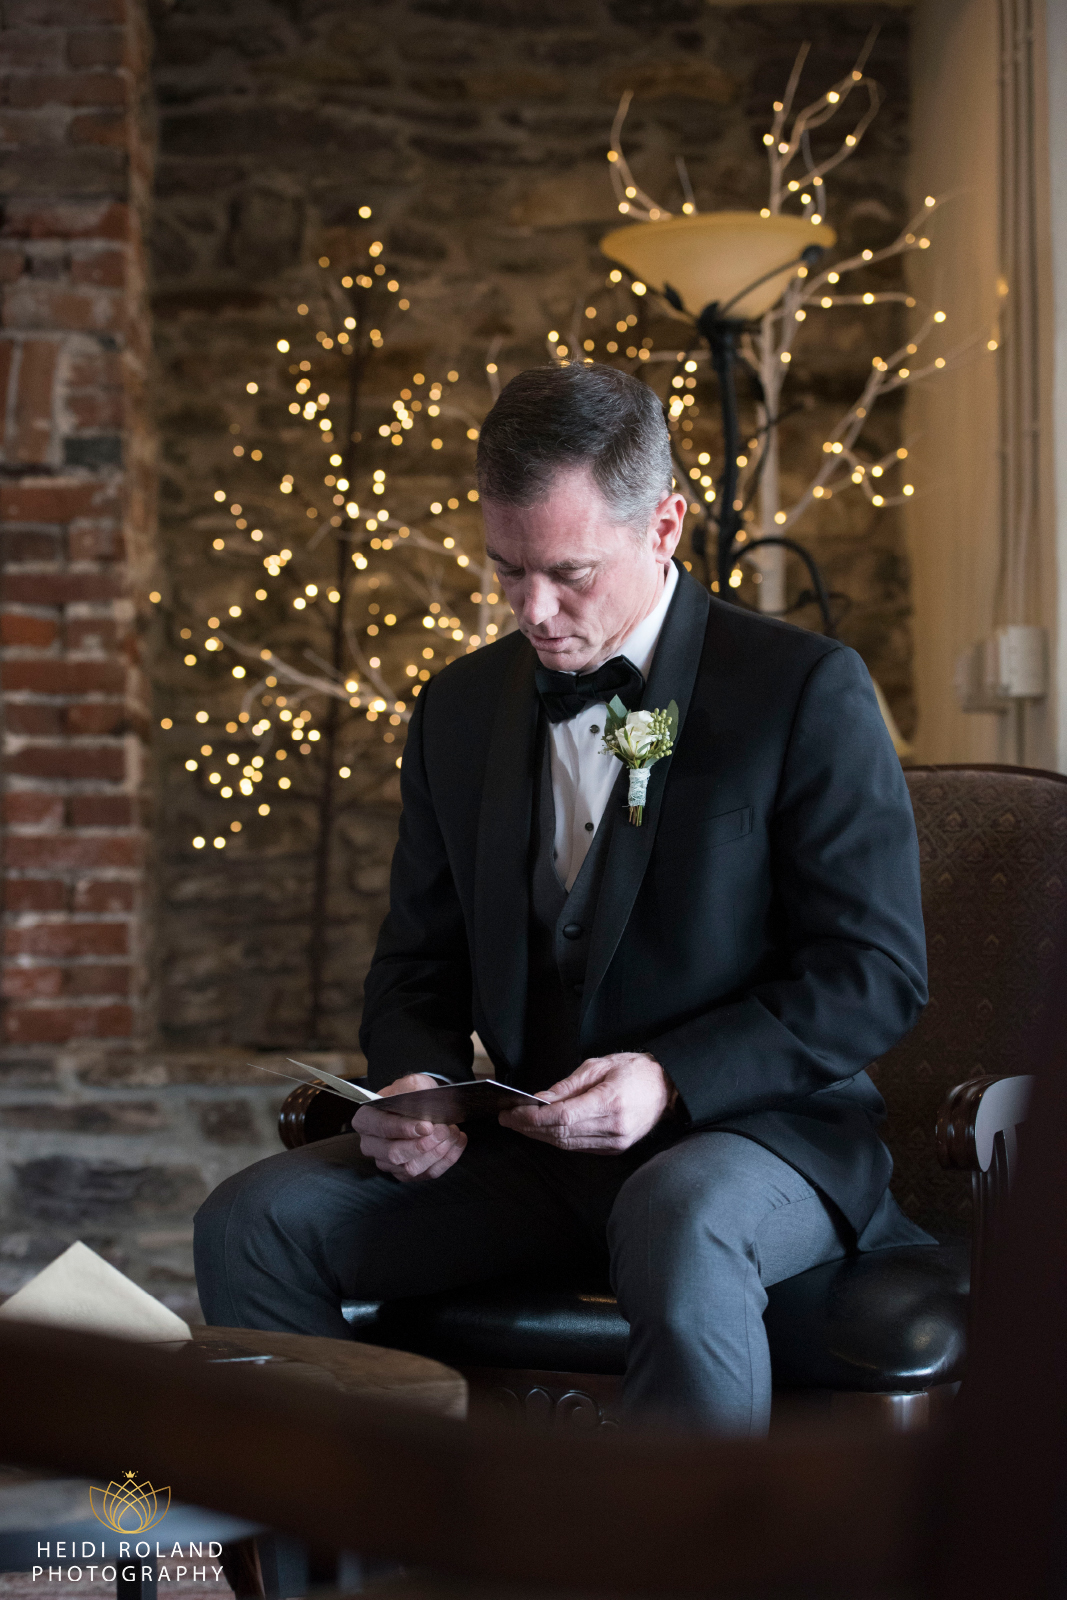 Groom reading card during getting ready